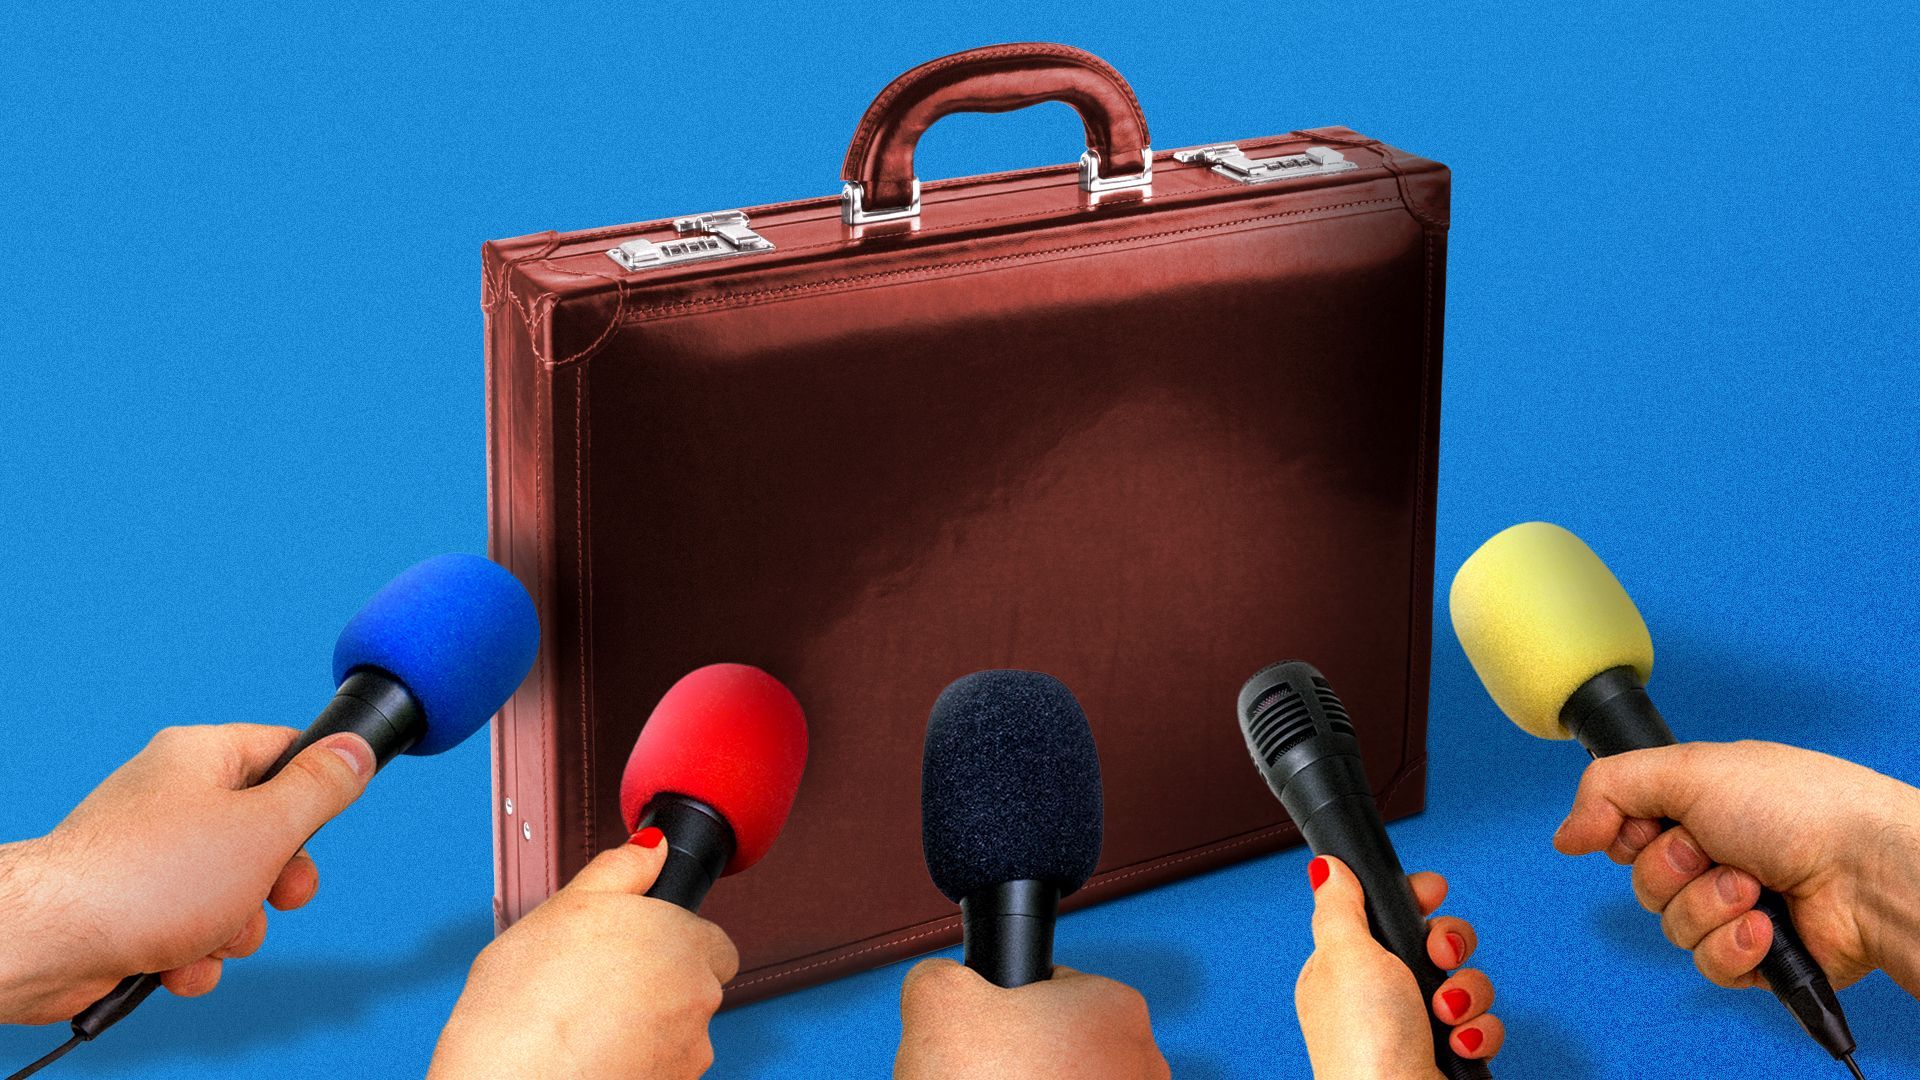 Illustration of various hands holding microphones surrorunding a briefcase